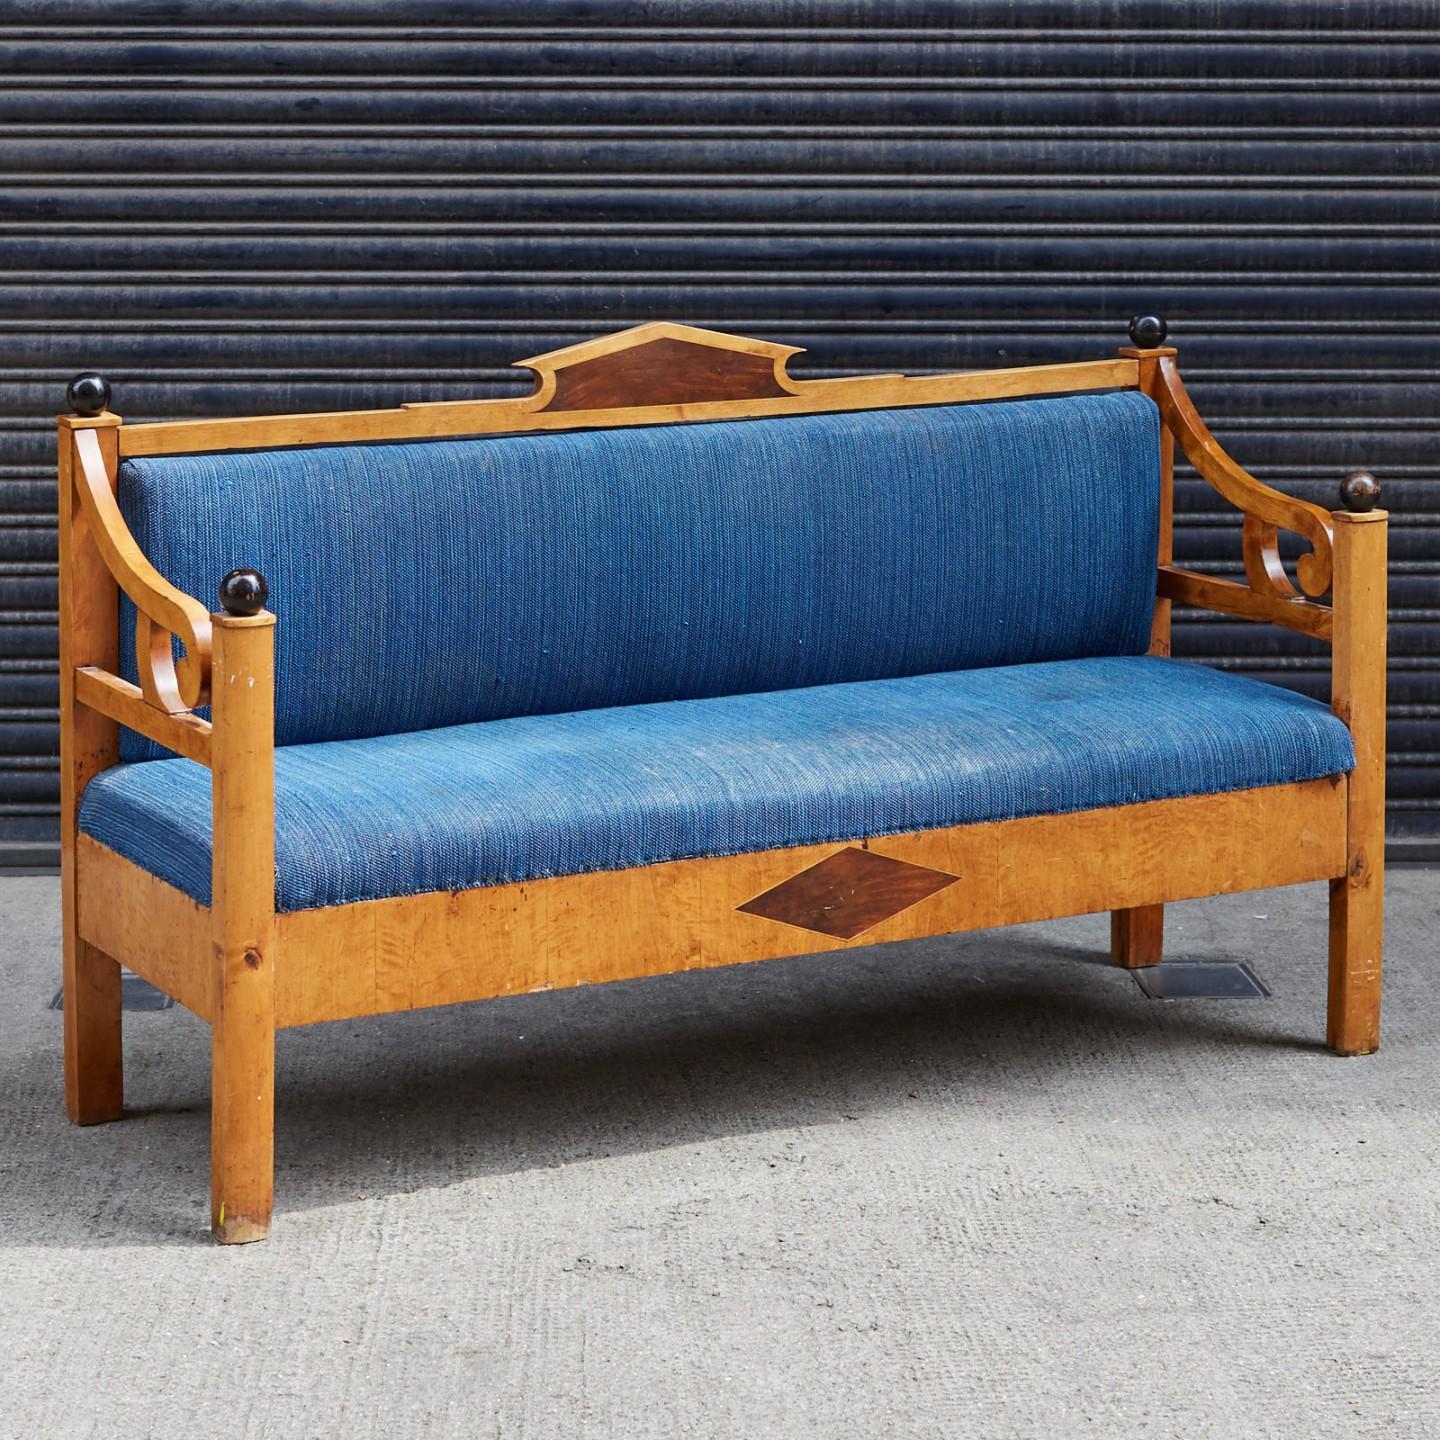 A maple Swedish bench, with dyed indigo upholstery and walnut inlay.